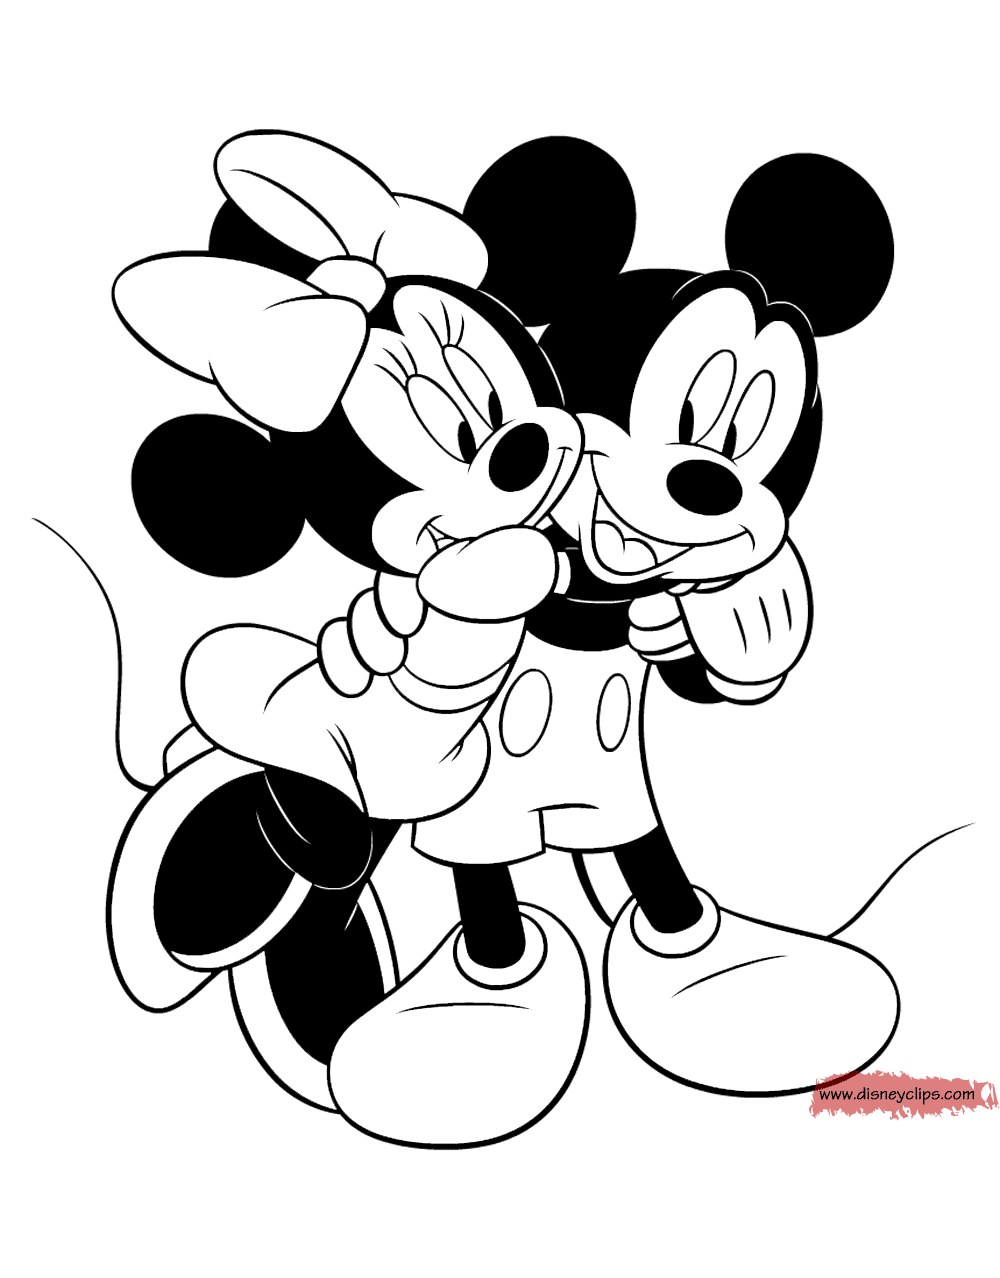 Mickey Mouse & Friends Coloring Pages 2 | Disney's World ...